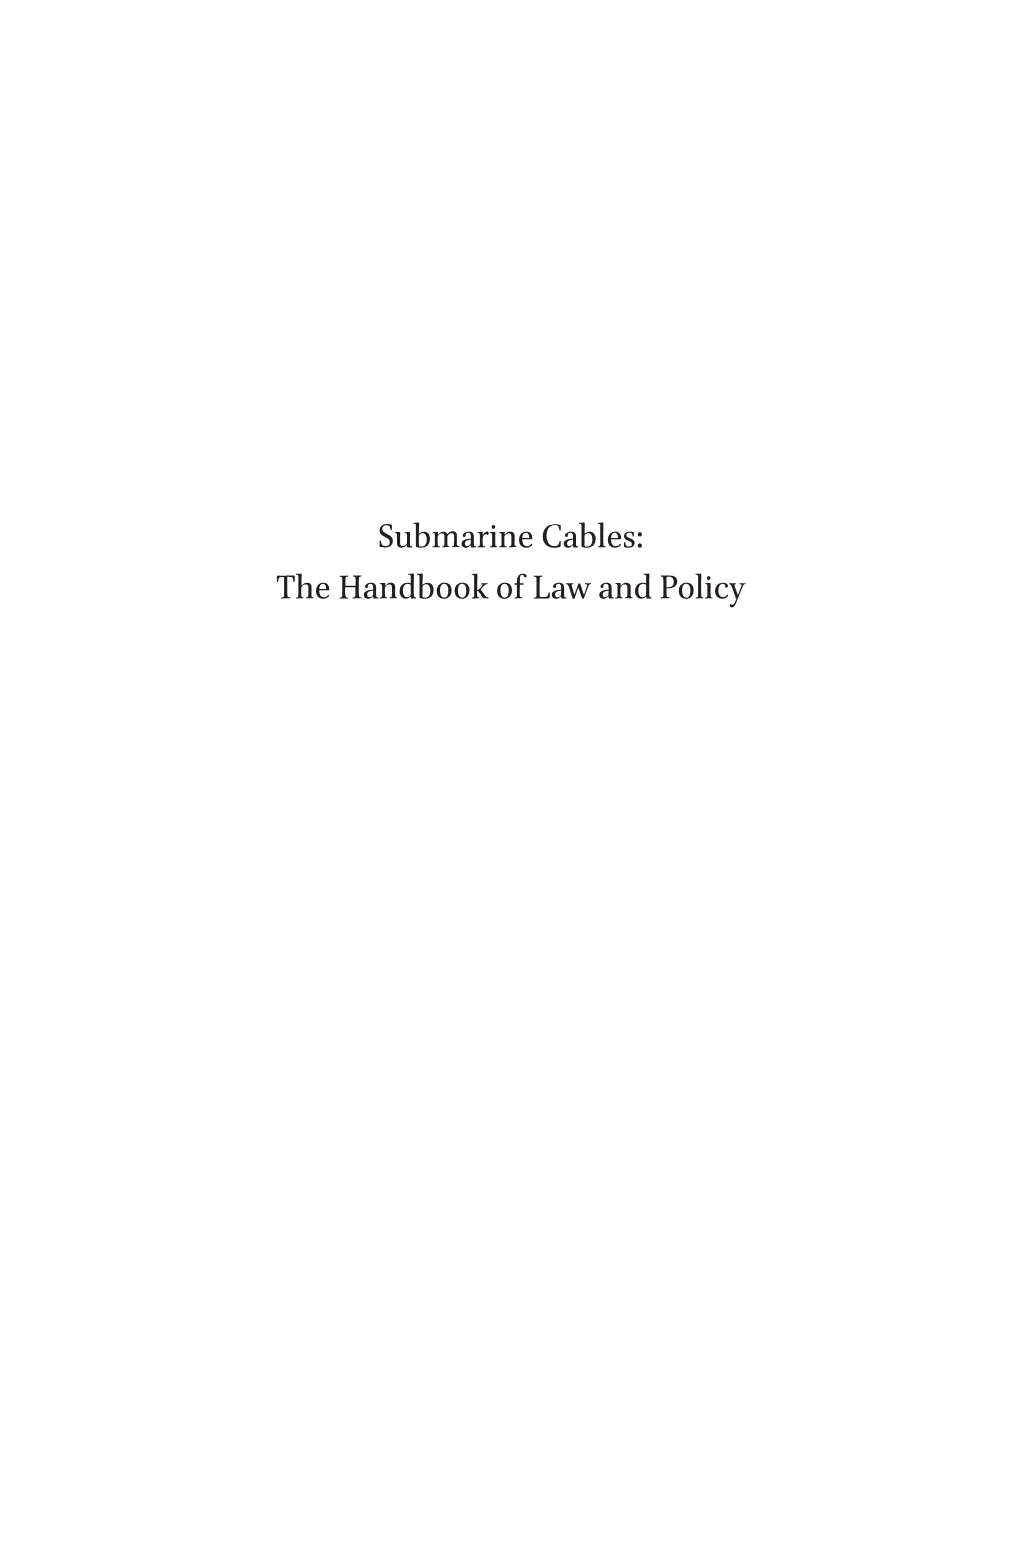 Submarine Cables: the Handbook of Law and Policy